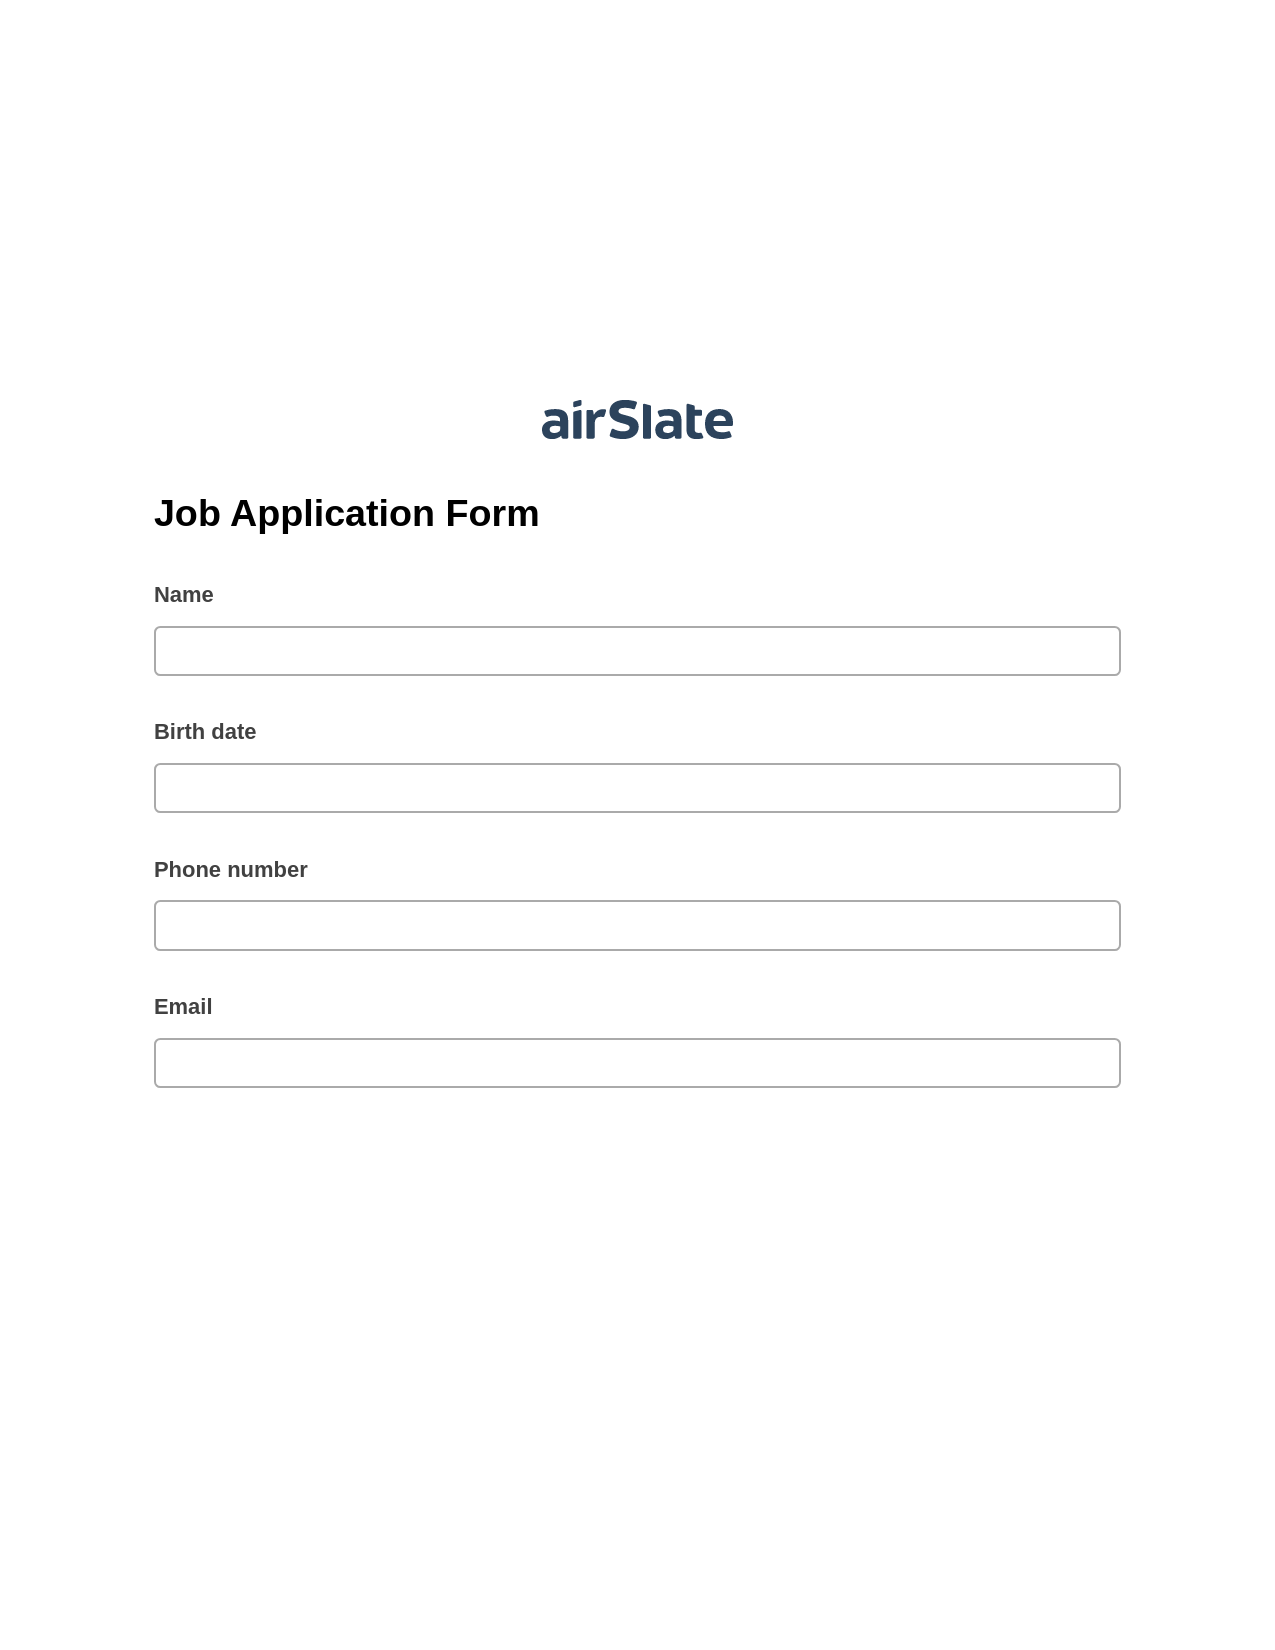 Job Application Form Pre-fill from Google Sheets Bot, Remove Slate Bot, Export to Smartsheet